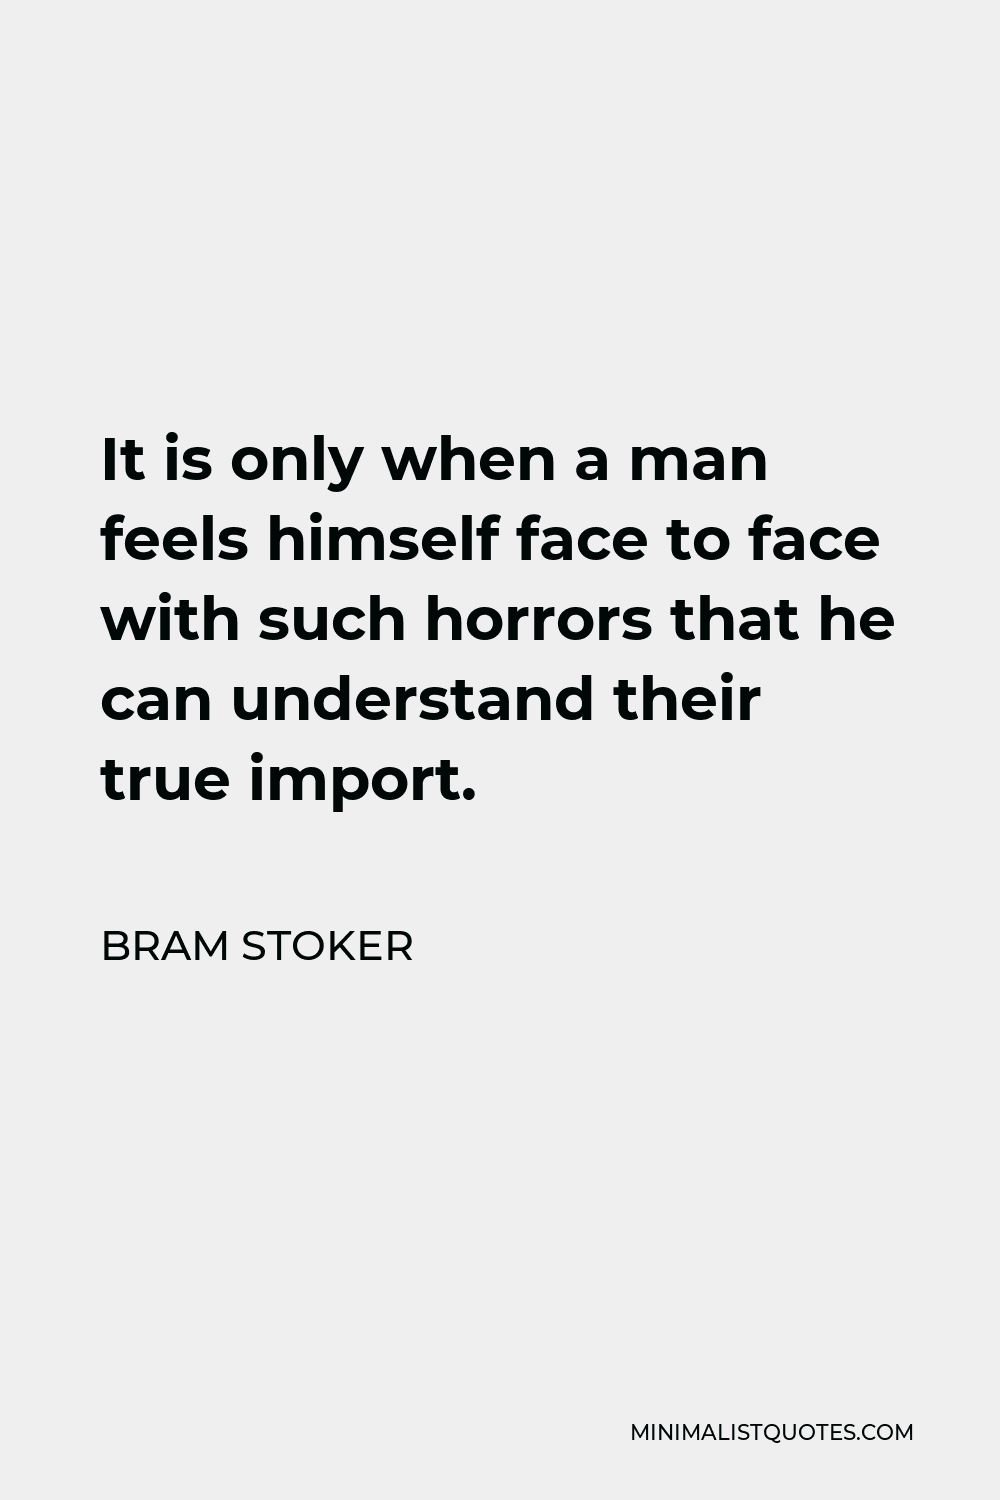 Bram Stoker Quote - It is only when a man feels himself face to face with such horrors that he can understand their true import.